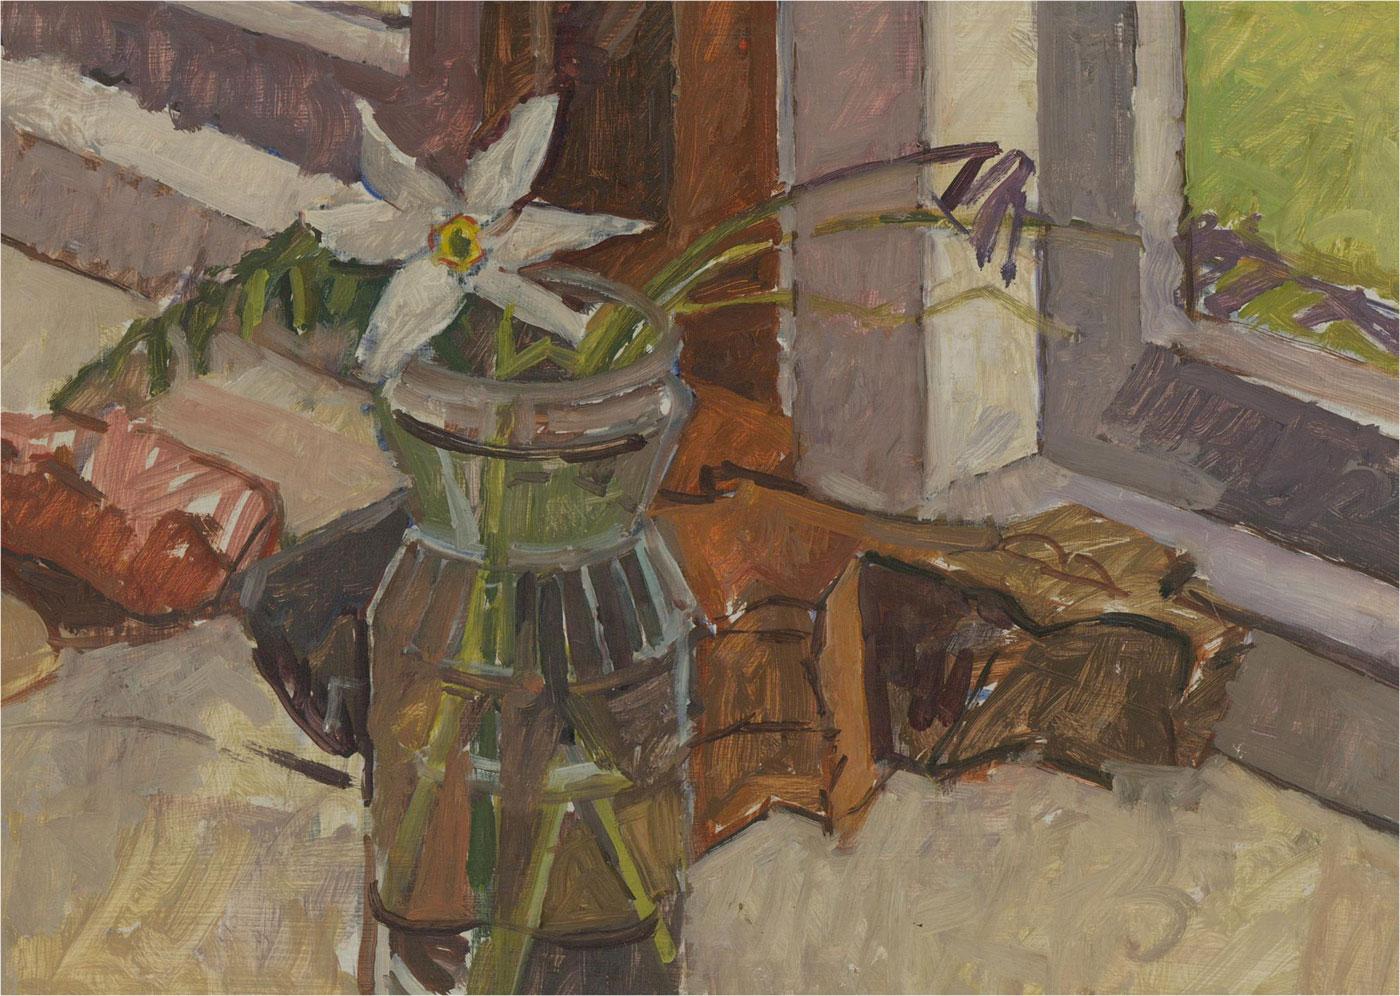 Roger Bliss - 20th Century Oil, White Flower by Window Sill 1